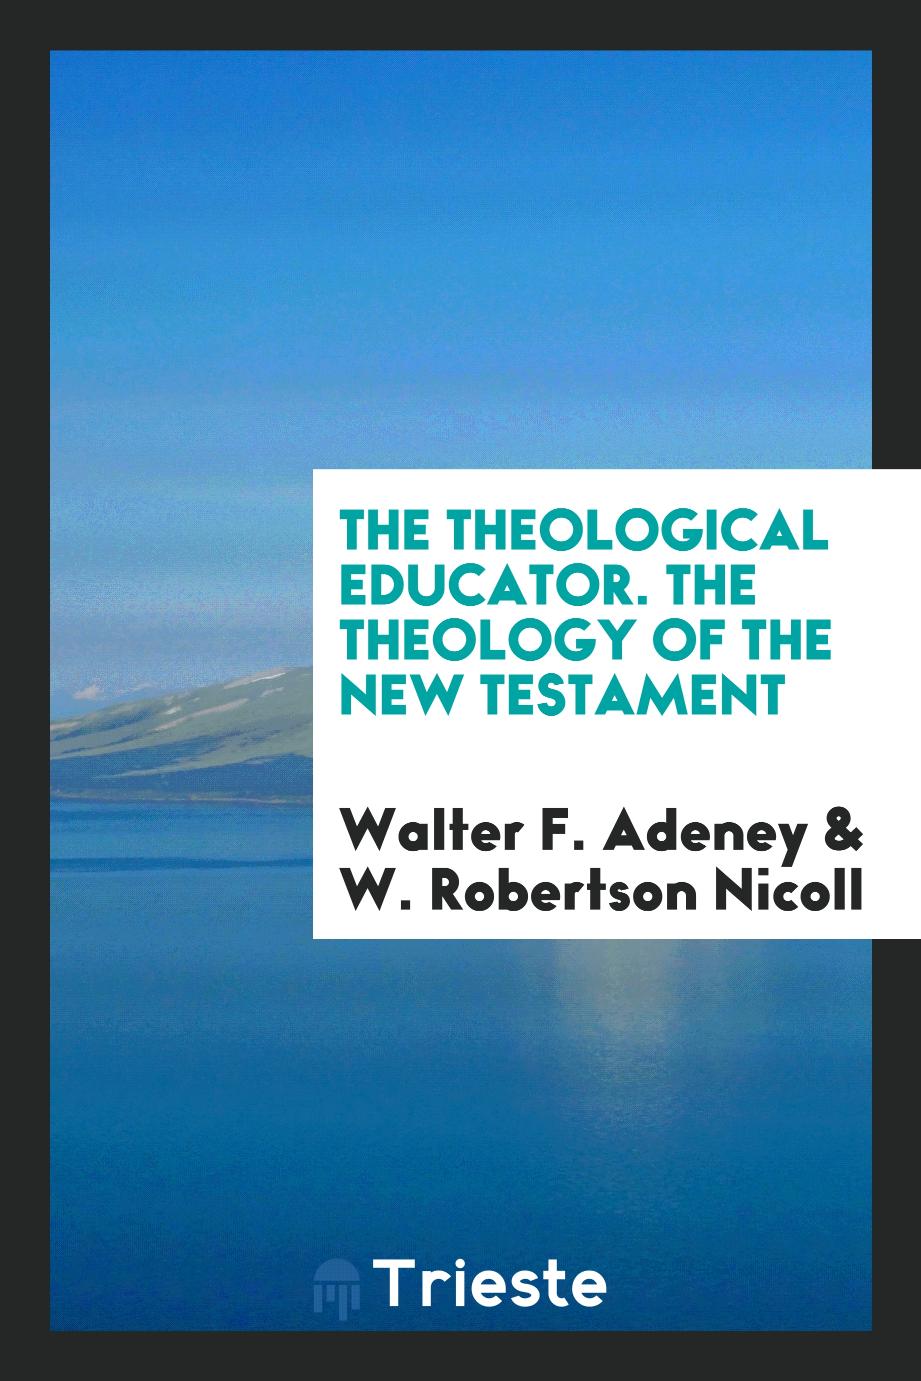 The Theological Educator. The Theology of the New Testament